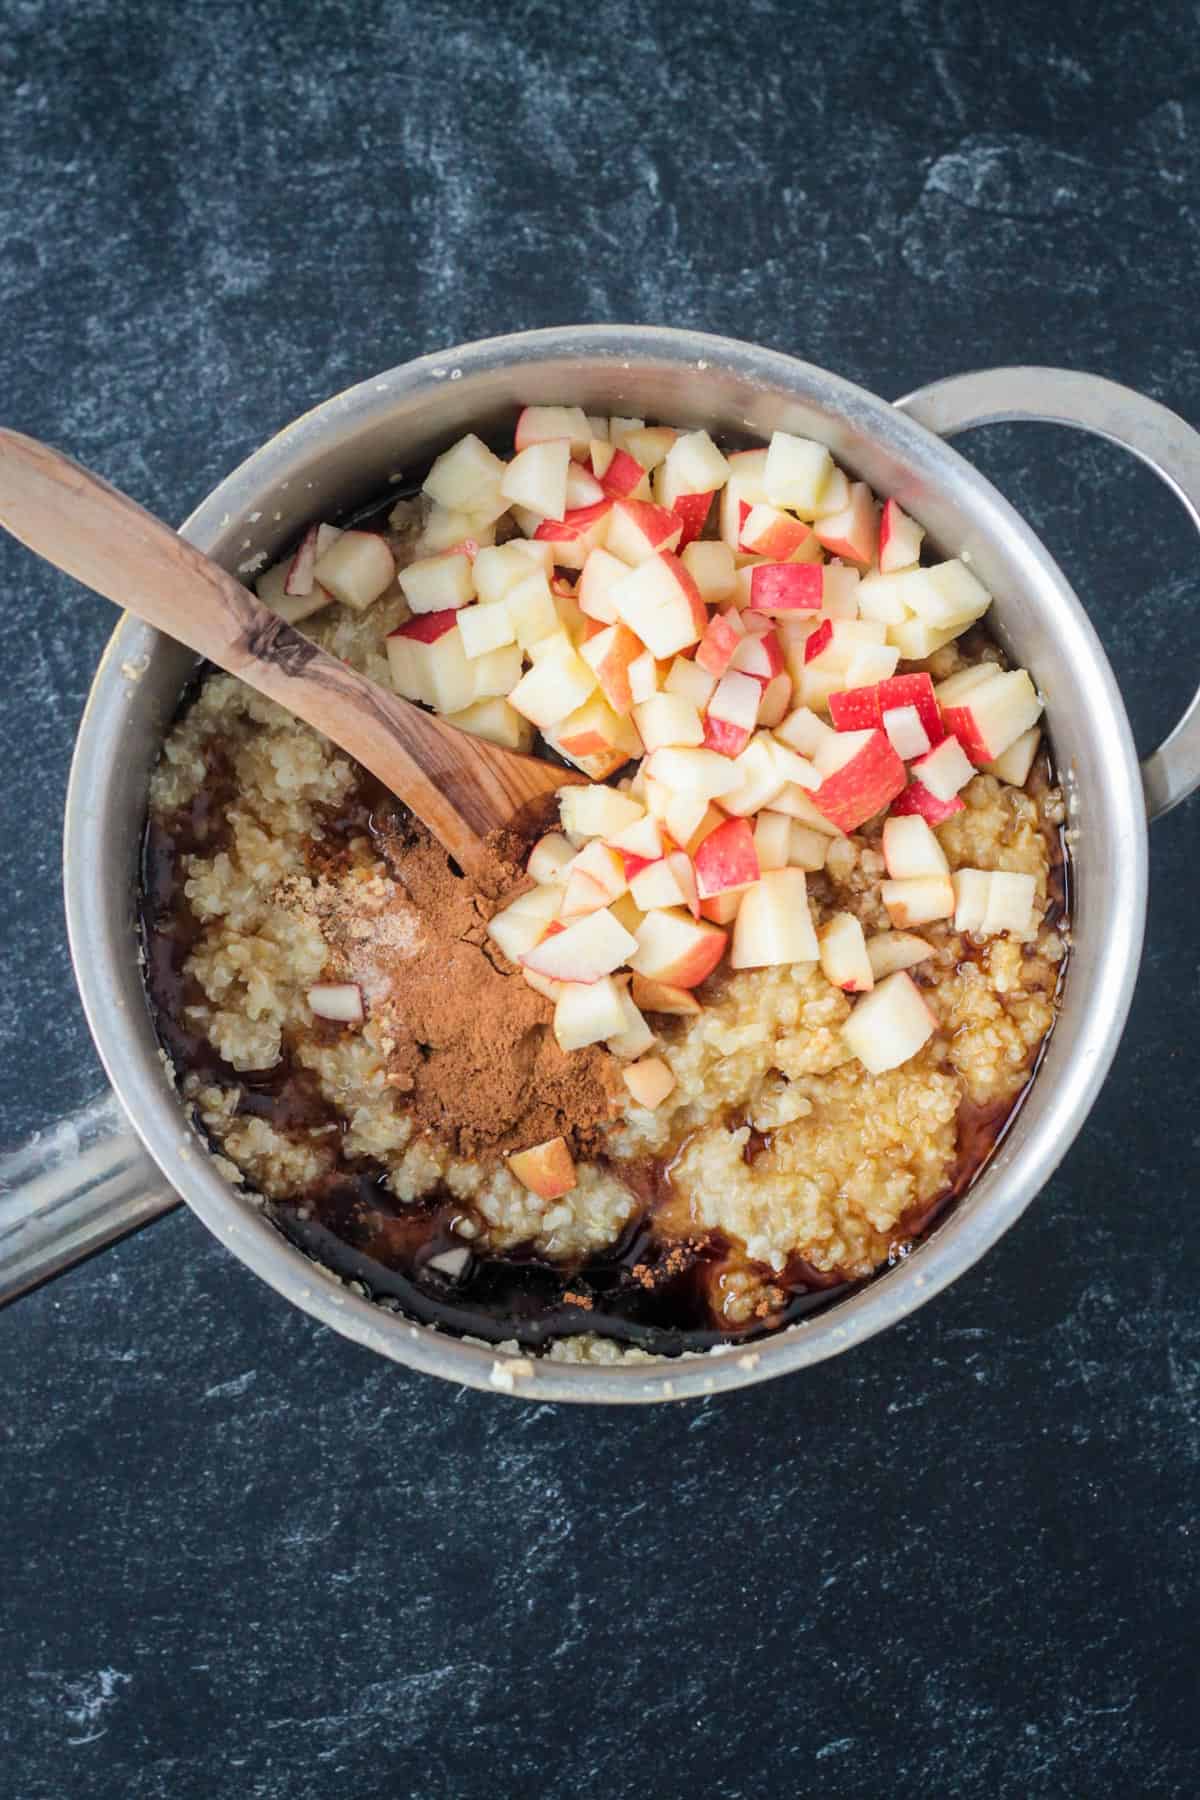 Chopped apples, spices, and maple syrup added to a pot of whole grain porridge.